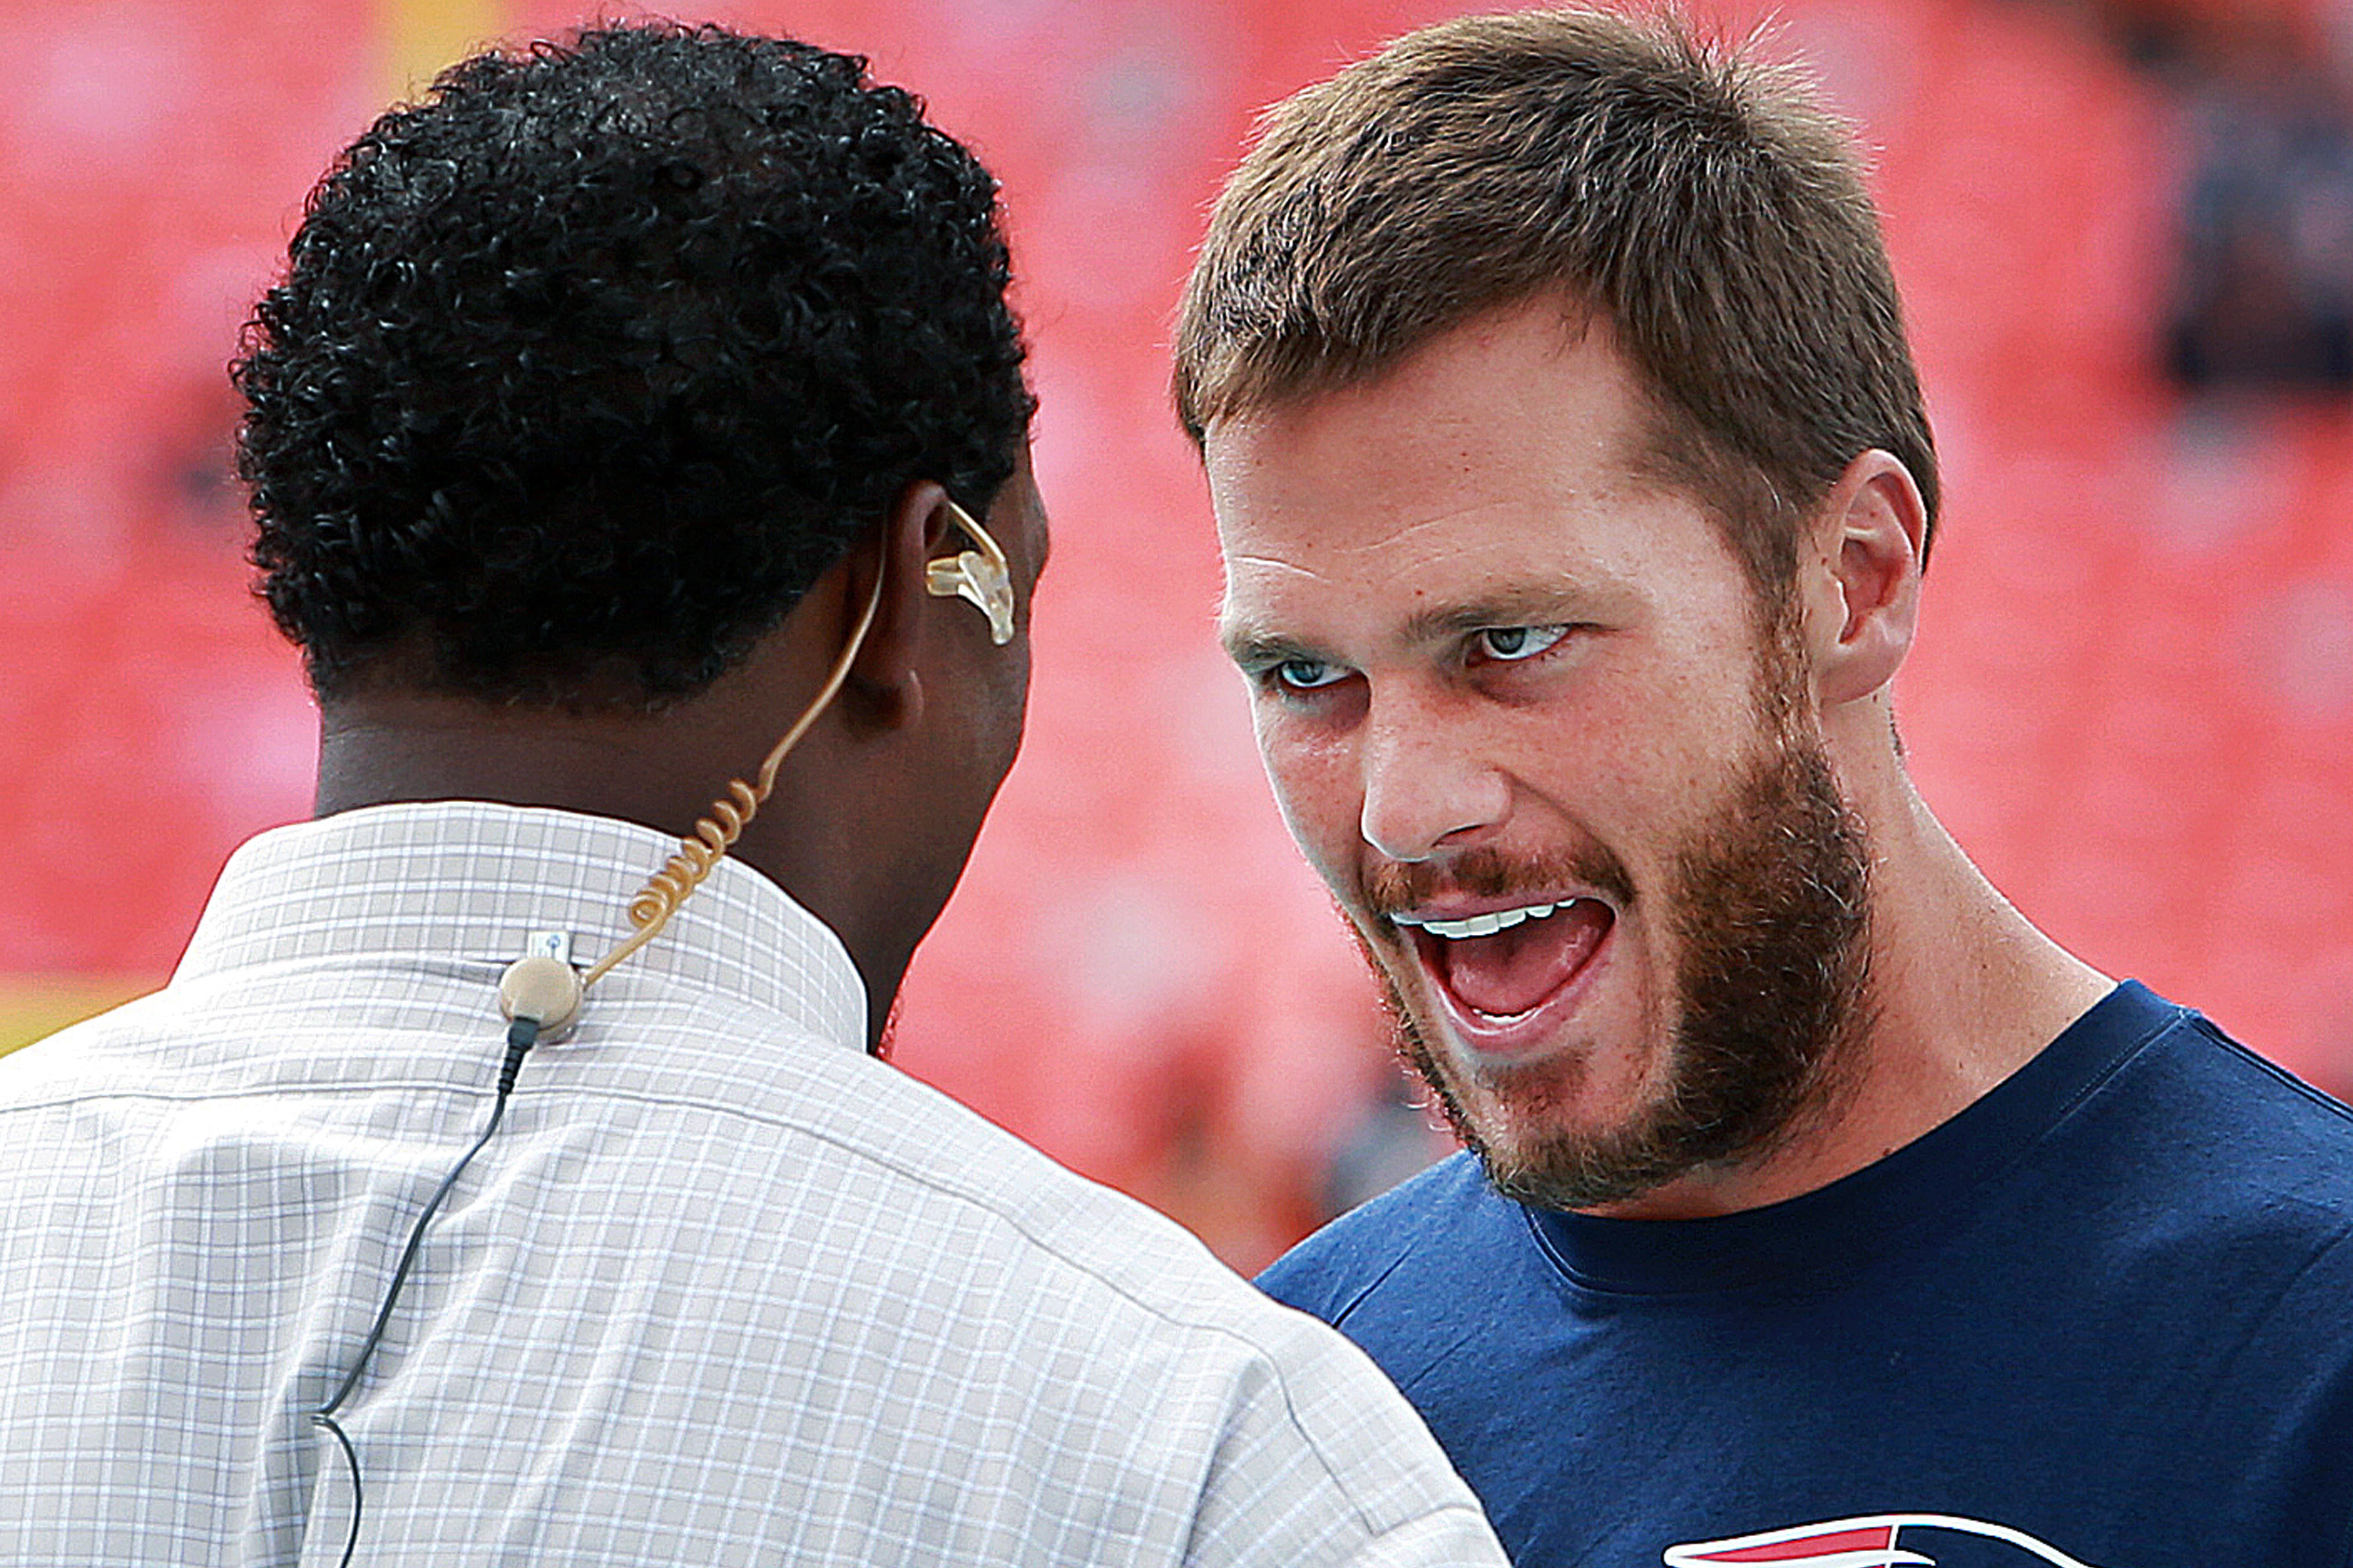 Patriots quarterback Tom Brady, right, chatted with former teammate Willie McGinest, left, now of the NFL Network before the Patriots faced the Miami Dolphins on Sept. 14. (Boston Globe—Boston Globe via Getty Images)